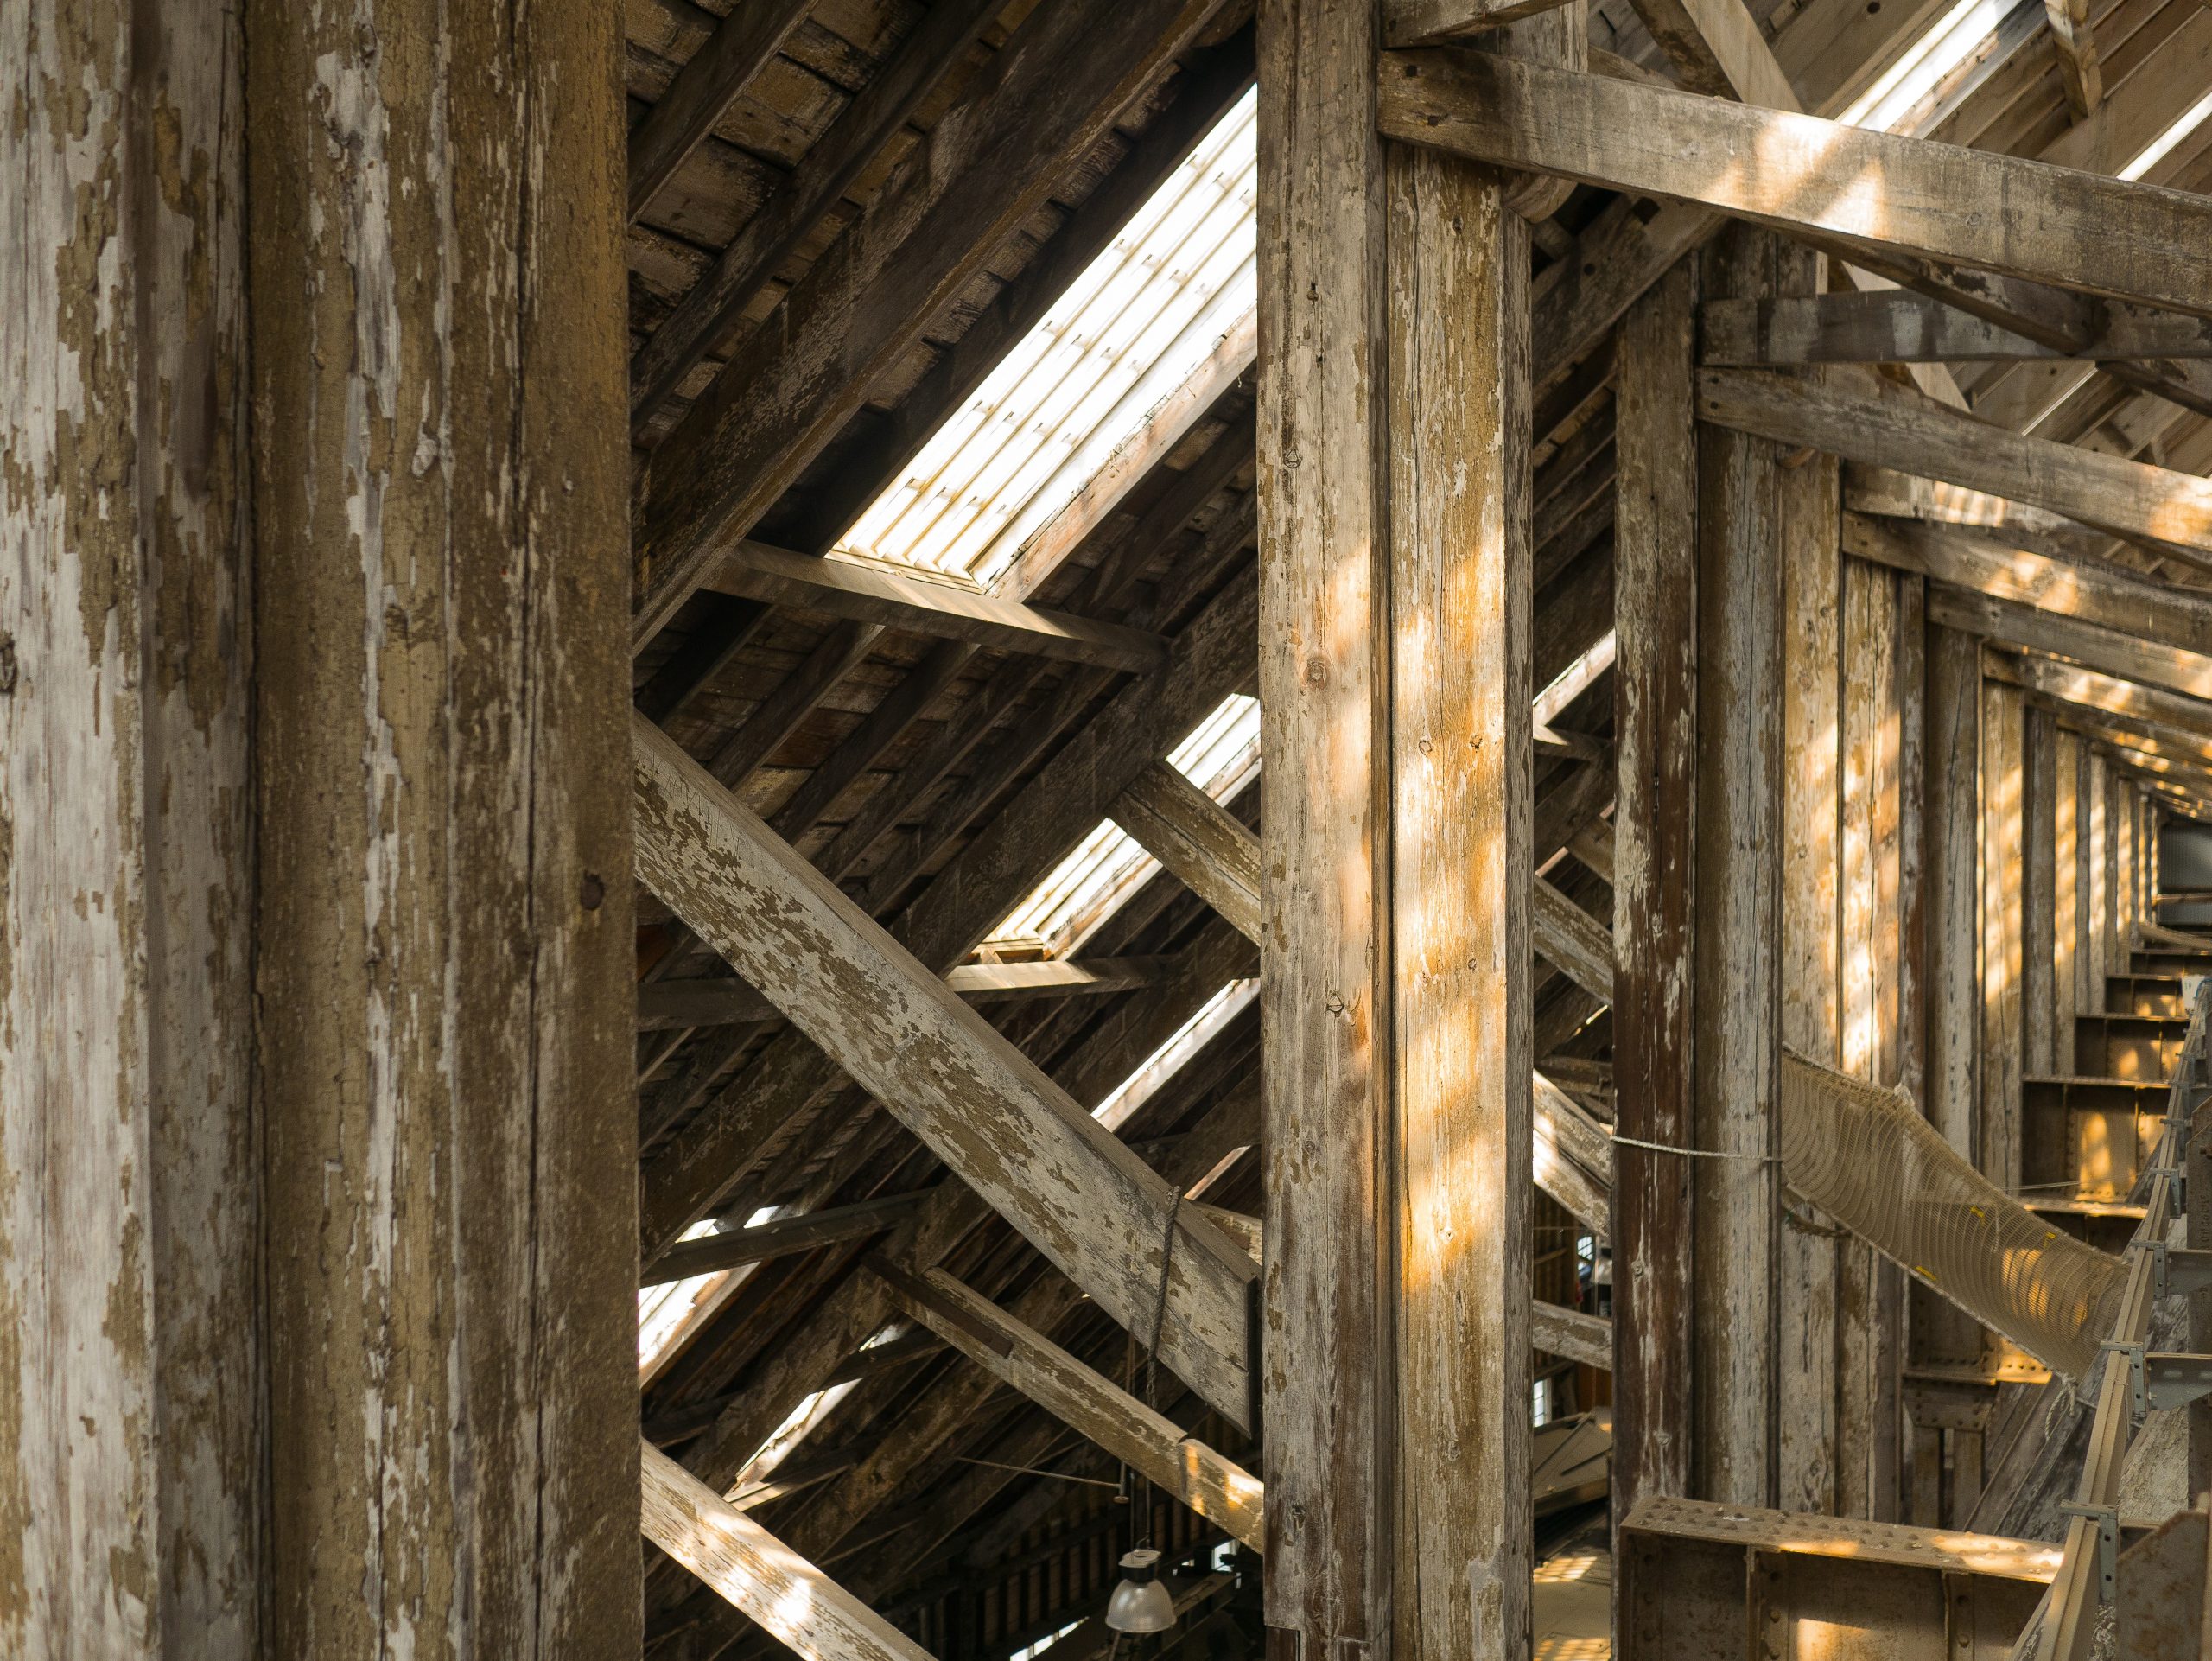 Wooden beams under the ceiling